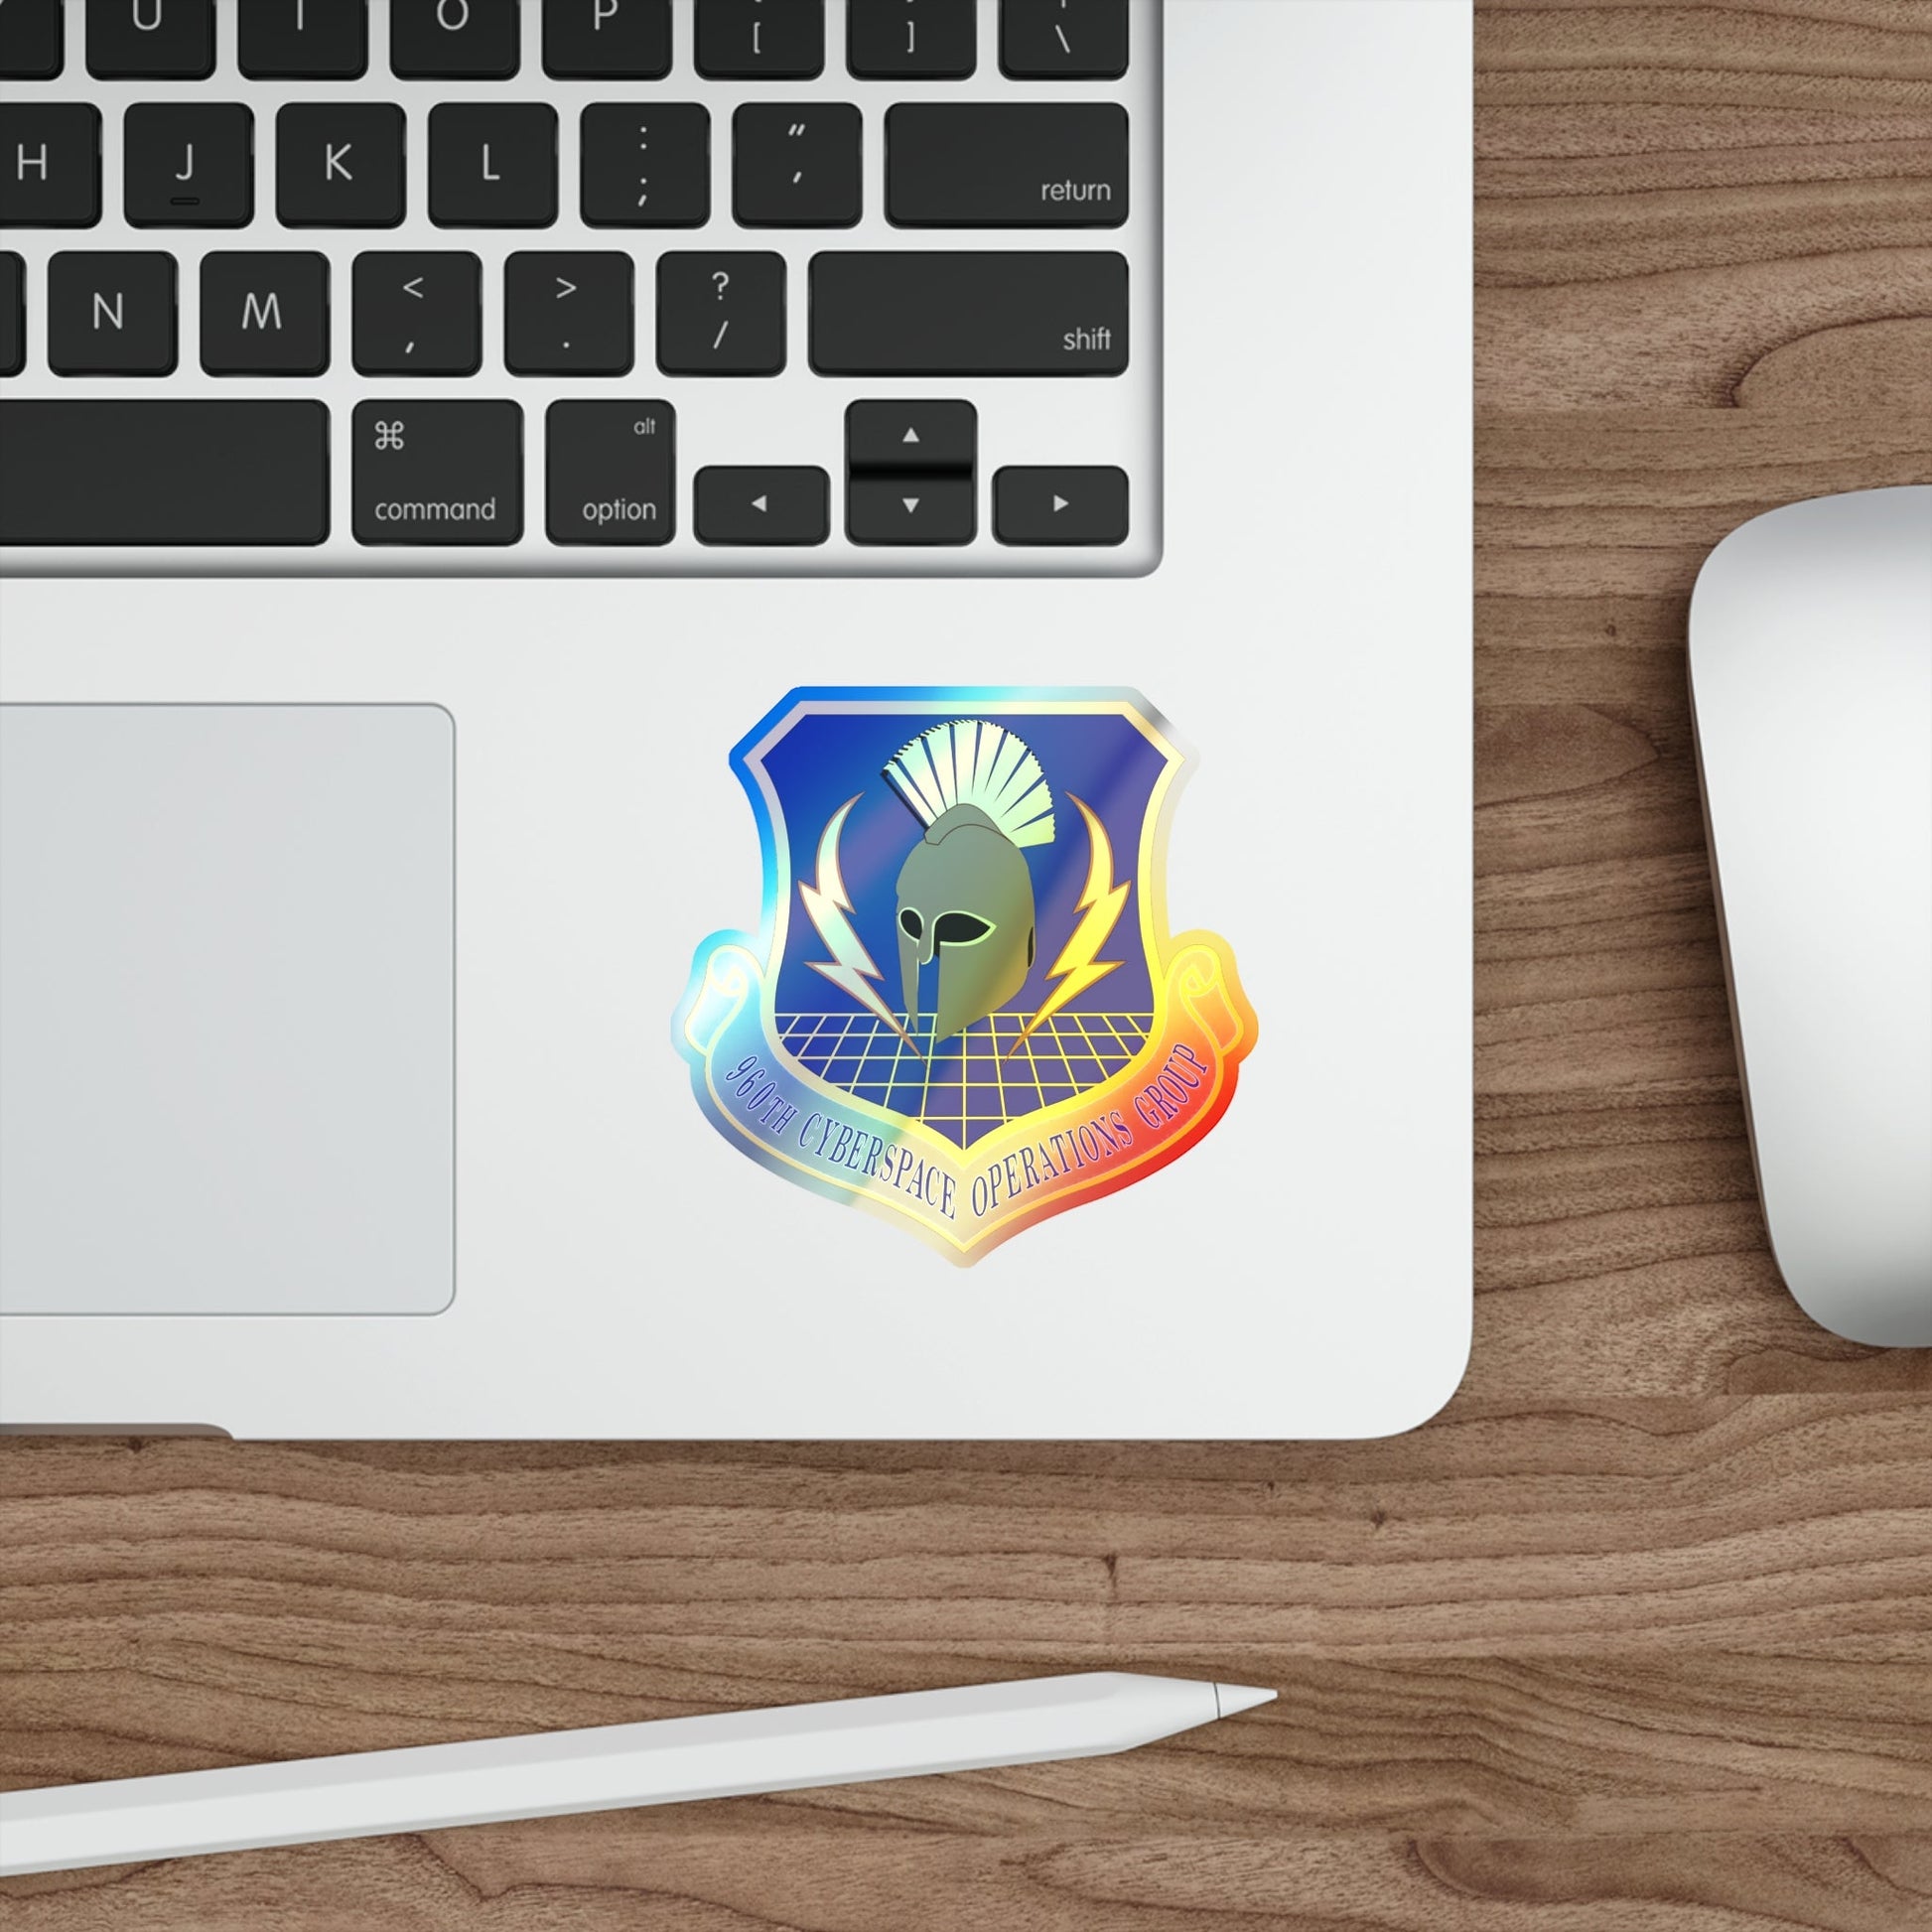 960th Cyberspace Operations Group (U.S. Air Force) Holographic STICKER Die-Cut Vinyl Decal-The Sticker Space